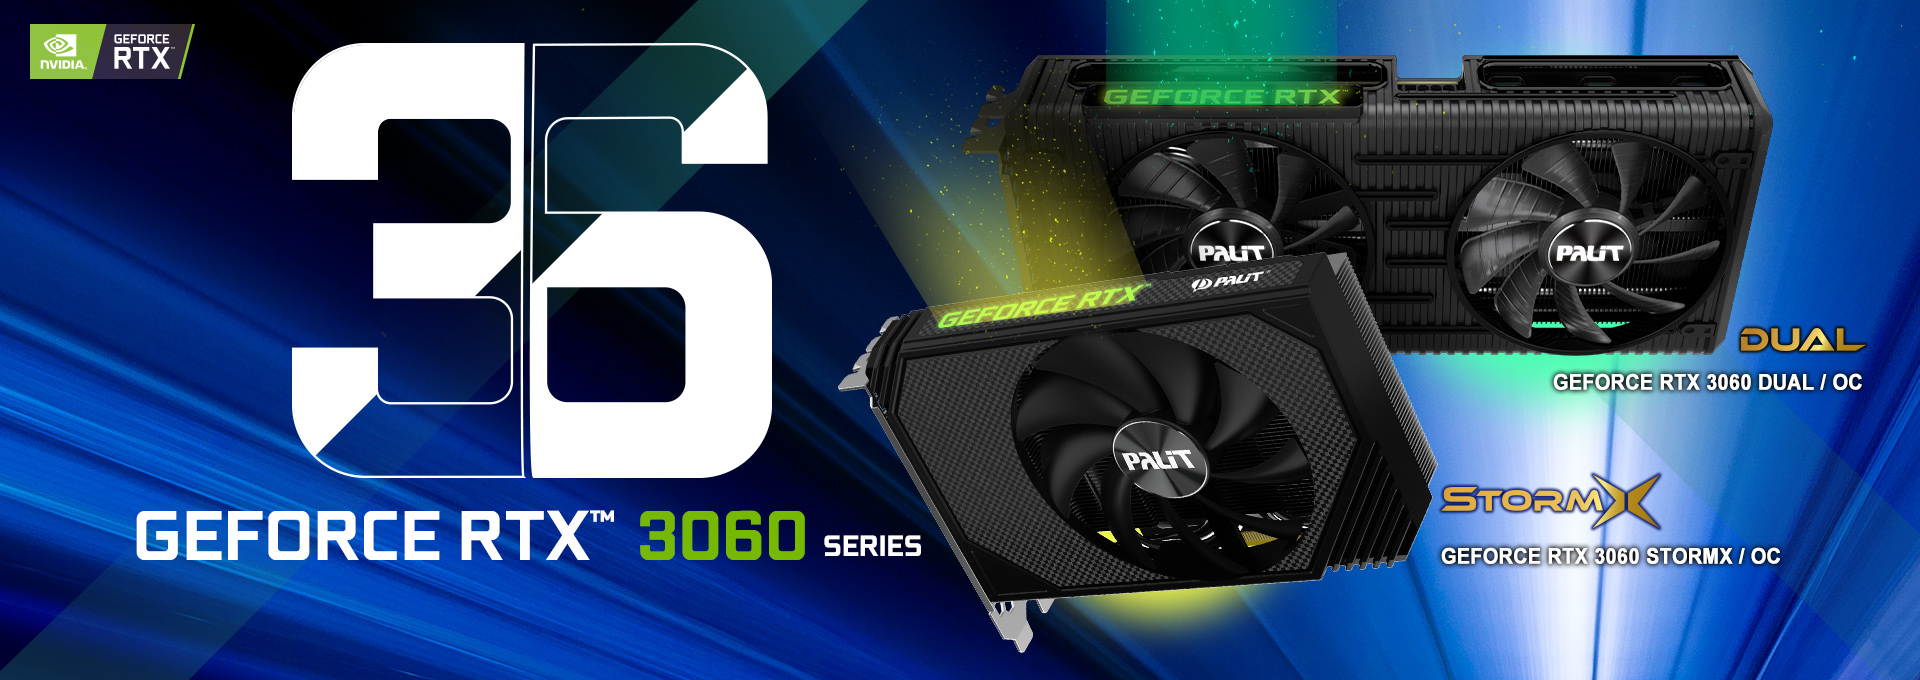 PALIT announces GeForce RTX 3060 Dual and StormX graphics cards